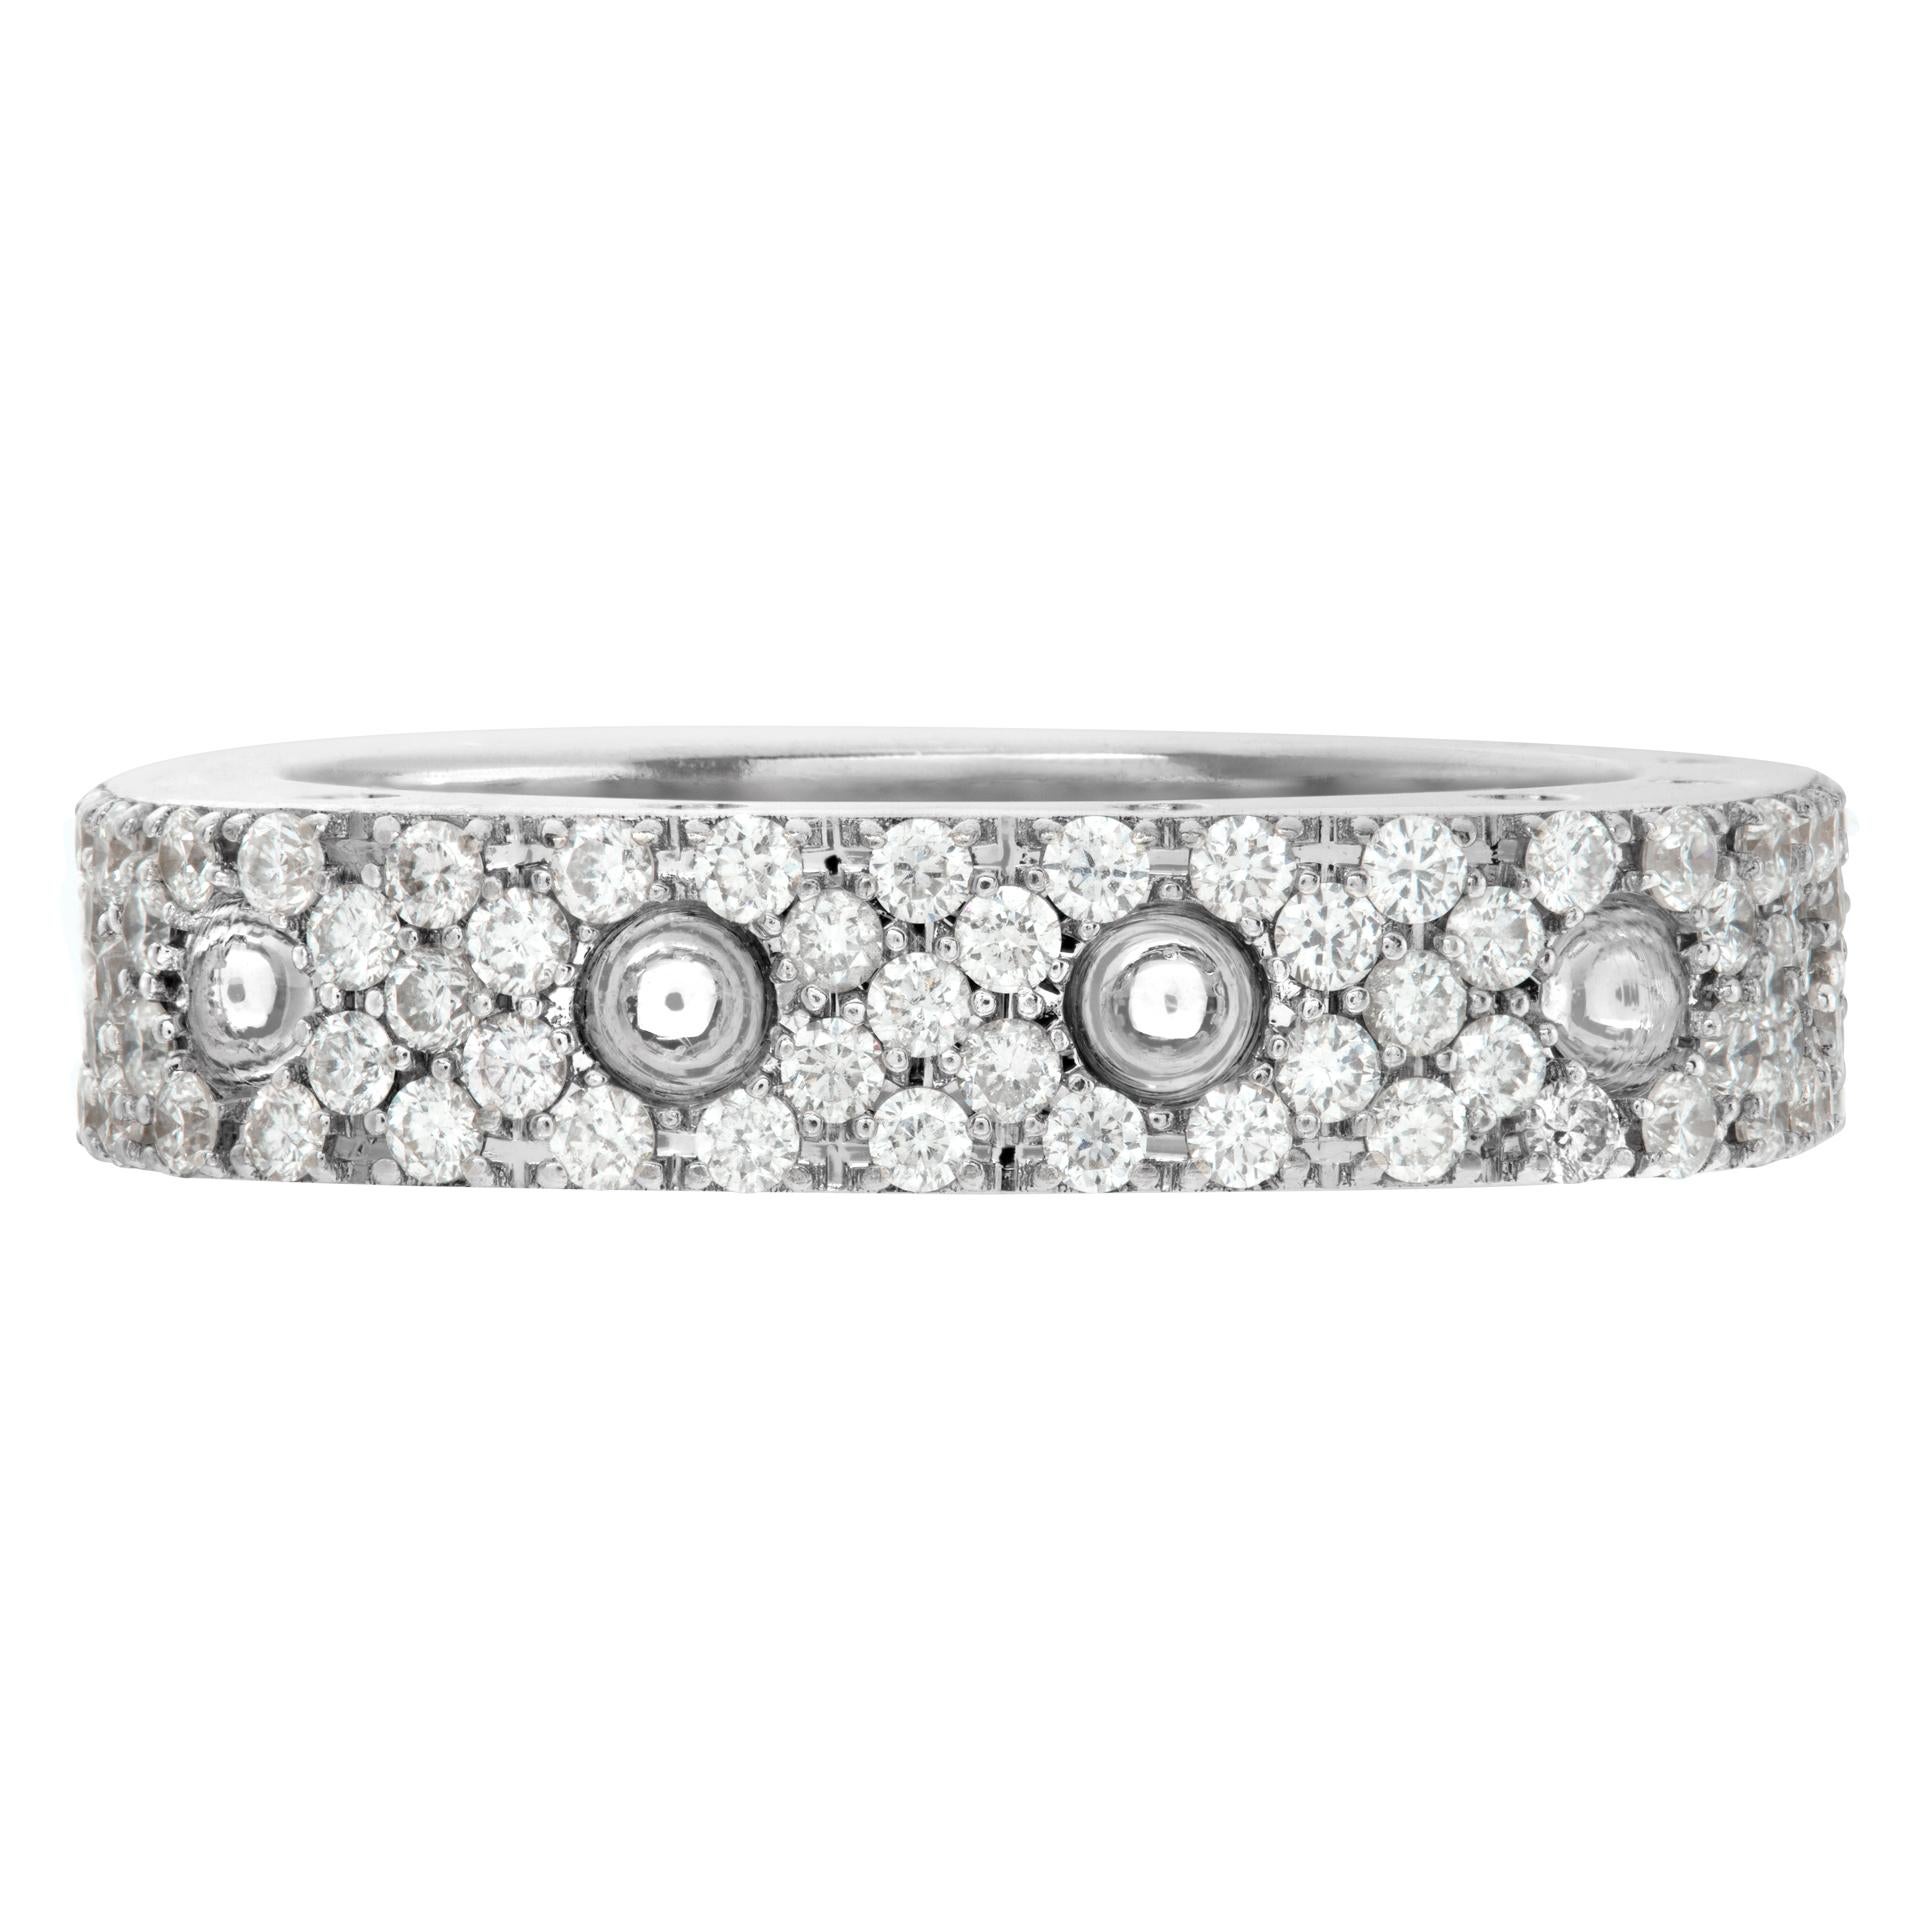 Roberto Coin Pois Moi diamond square band in 18k white gold with 0.67 carat in round pave diamonds. Size 7, width 3mm.This Roberto Coin ring is currently size 6.5 and some items can be sized up or down, please ask! It weighs 0 pennyweights and is